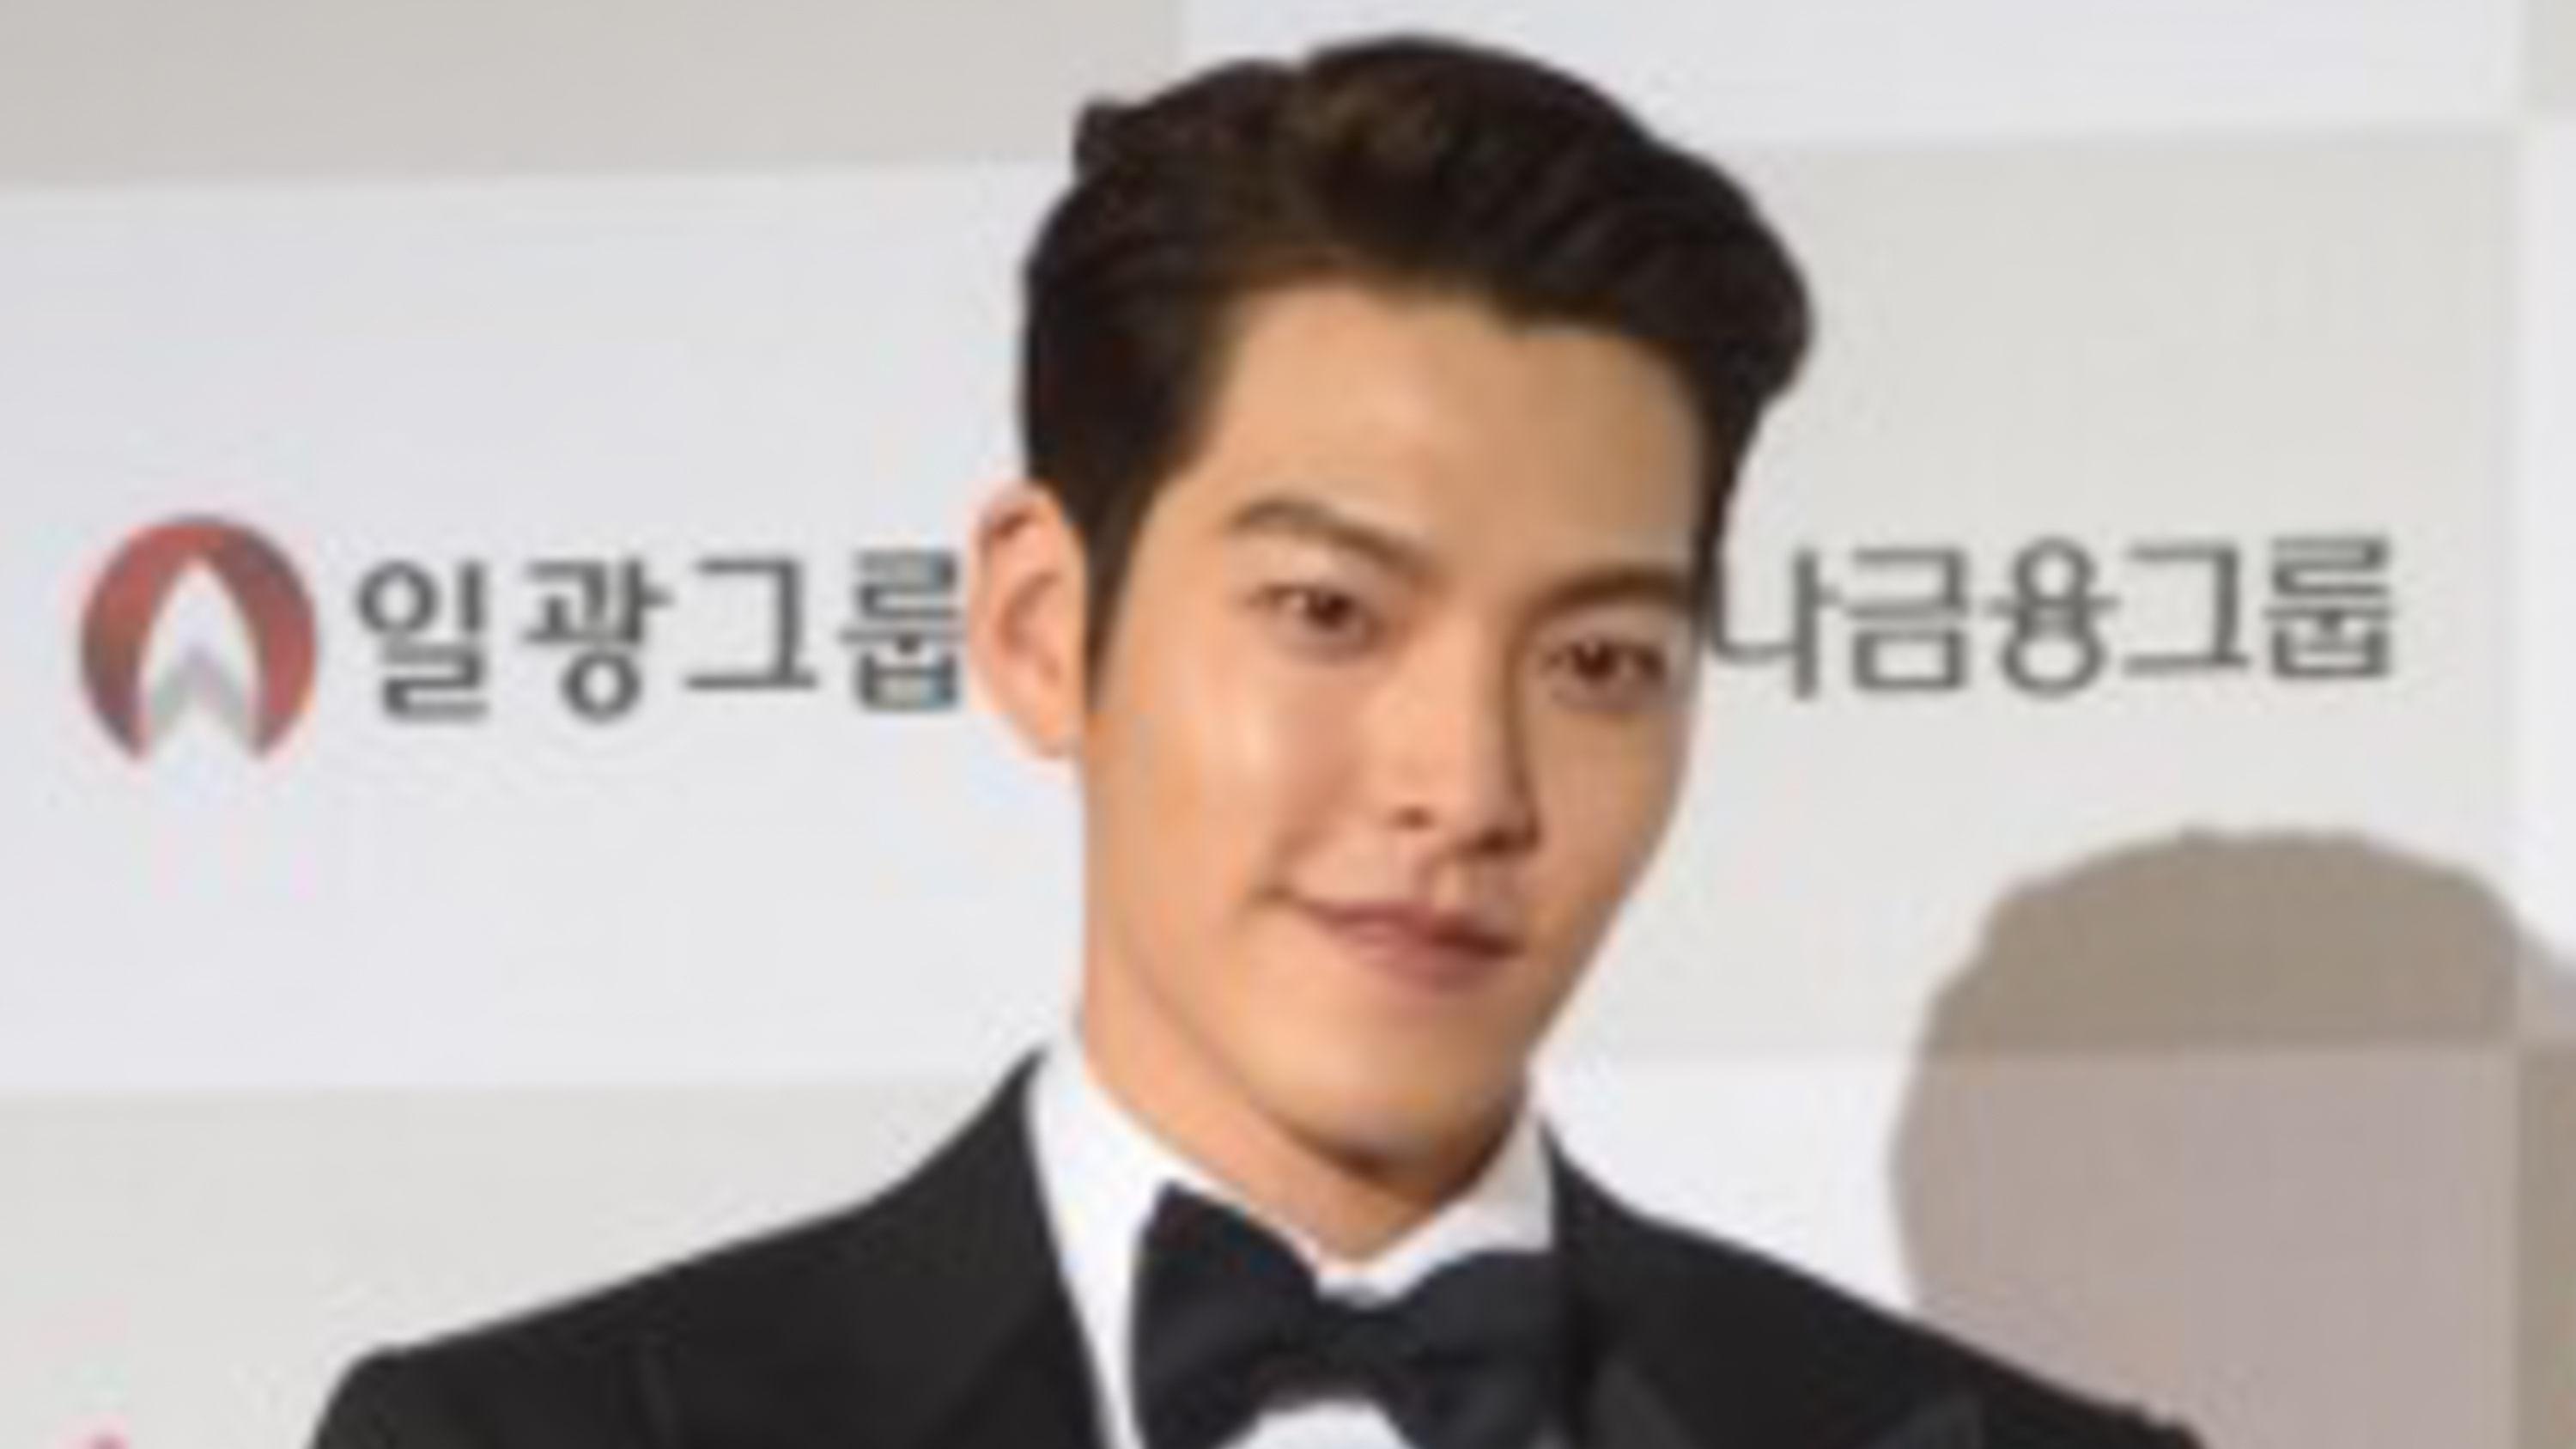 KIM WOO BIN. The Korean actor is diagnosed with cancer. In the photo, Kim Woo-Bin arrives on the red carpet of the 51st annual Daejong Film Awards in Seoul on November 21, 2014. Photo by Ed Jones/AFP 